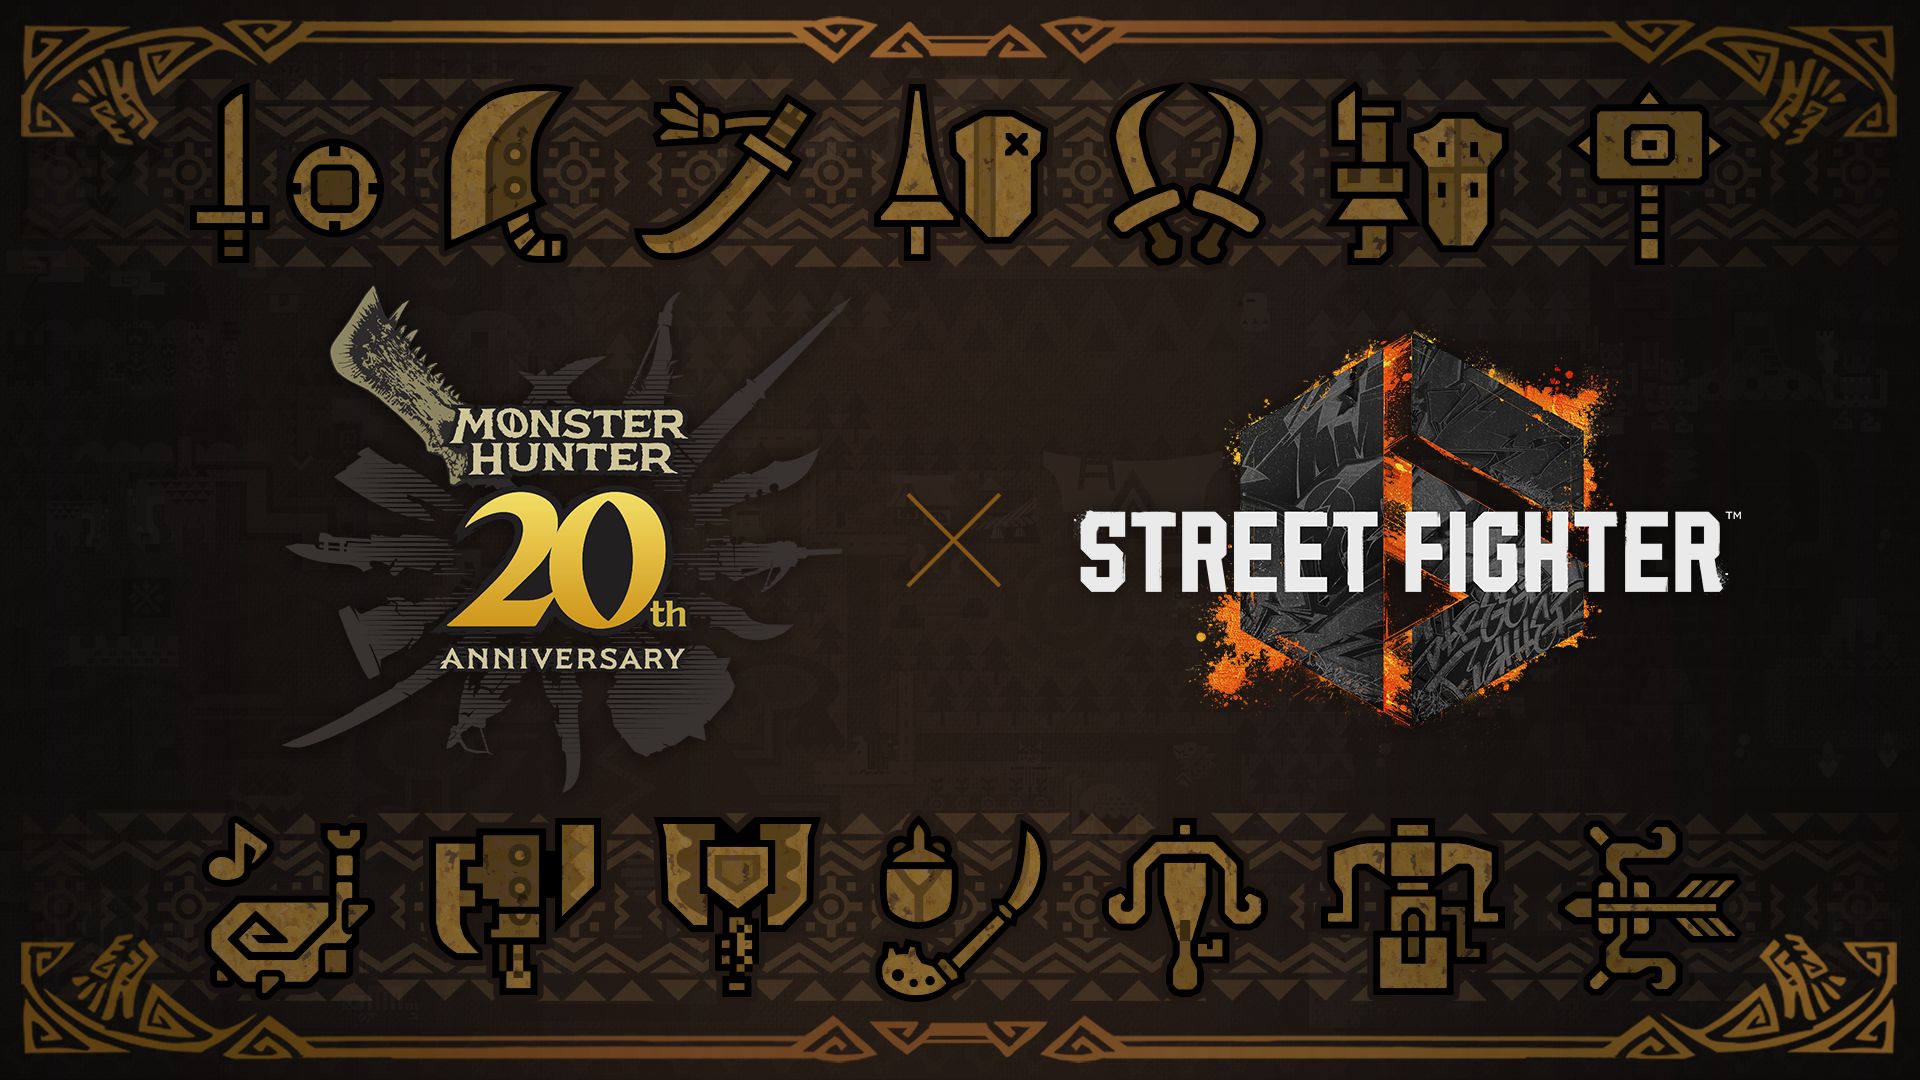 Street Fighter 6 x Monster Hunter: disponibile l'evento collab